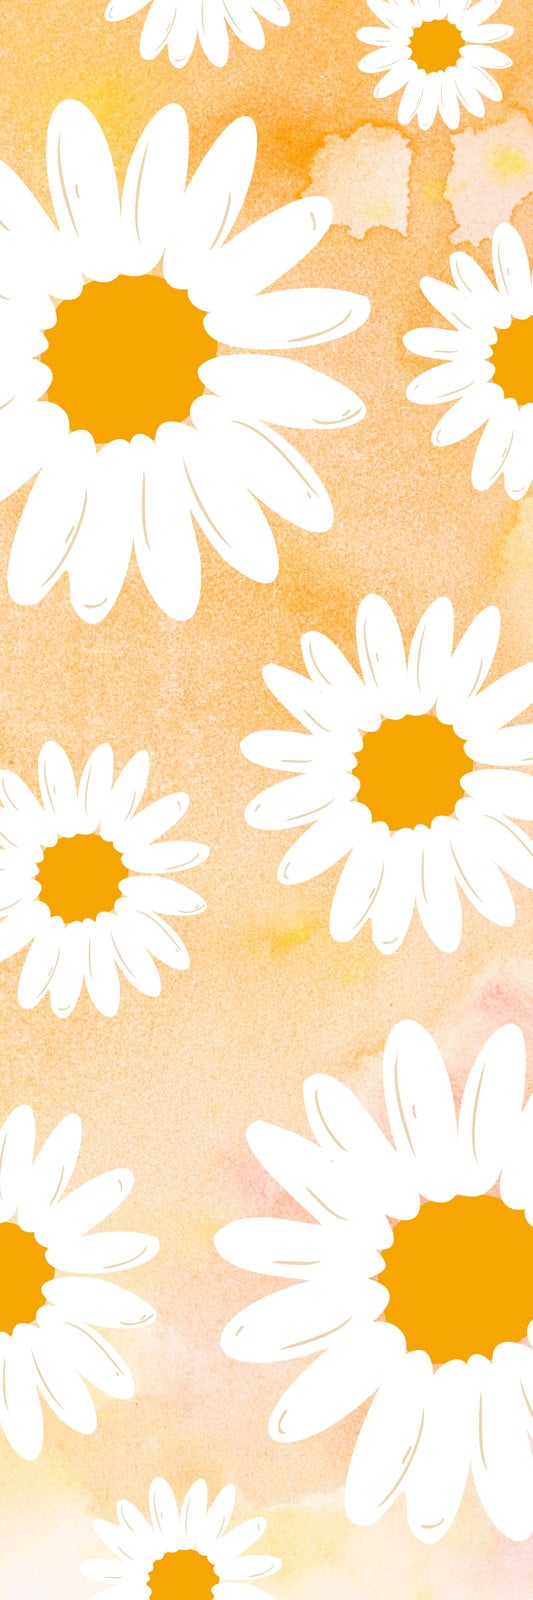 A watercolor painting of daisies on an orange background - Shrek